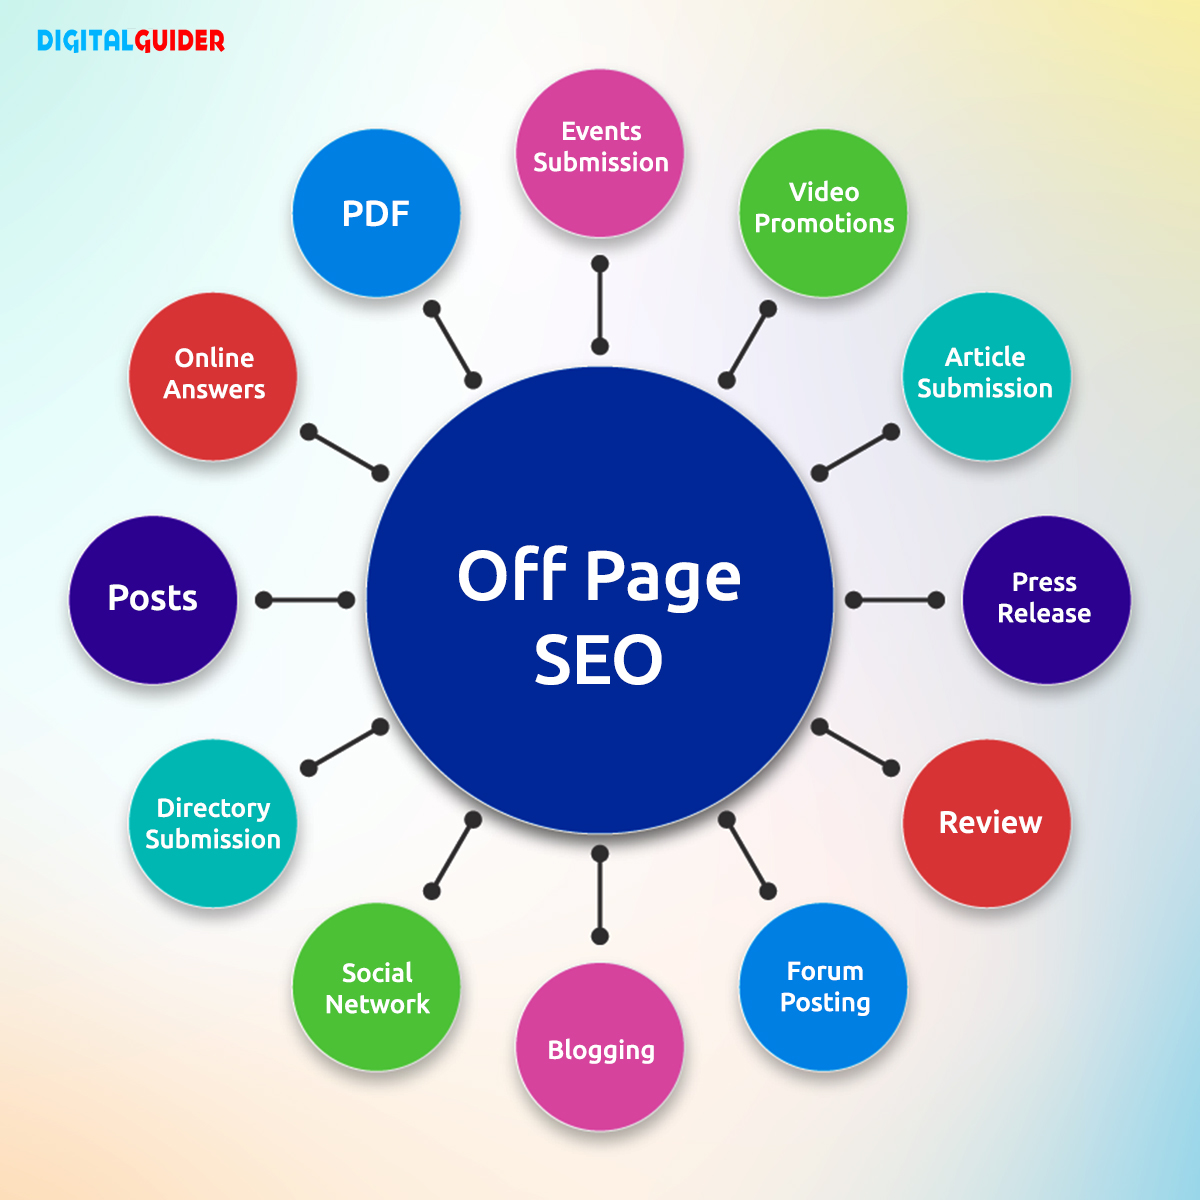 Showing elements of Off Page SEO